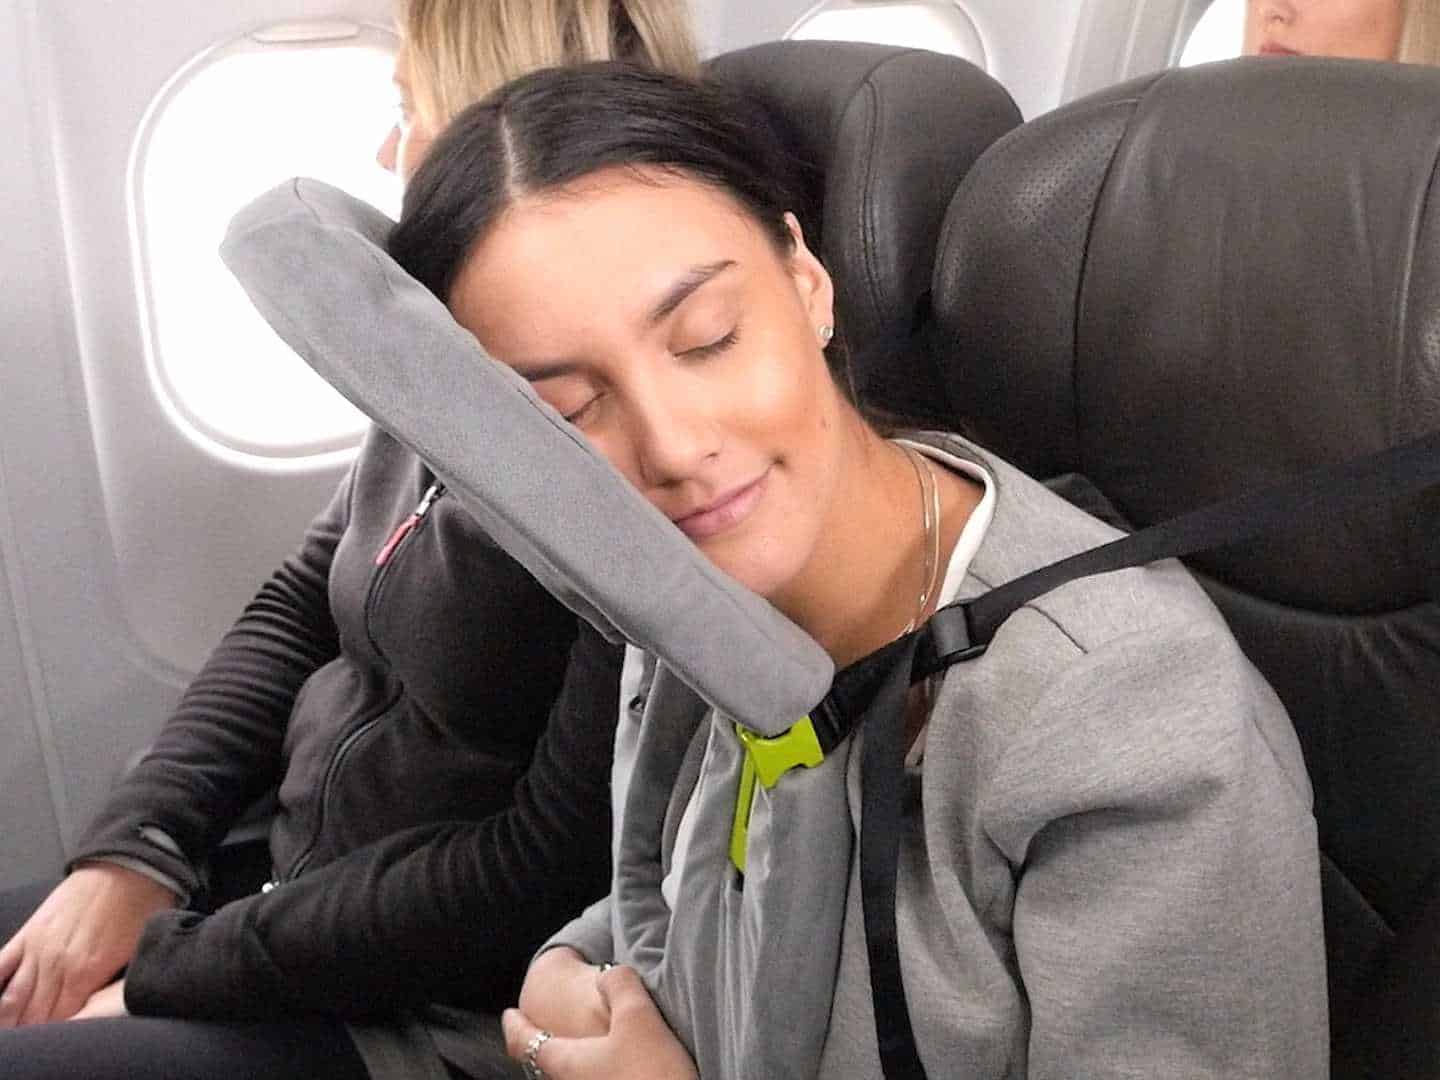 13 Highly Comfortable And Unique Travel Pillows for Travelers